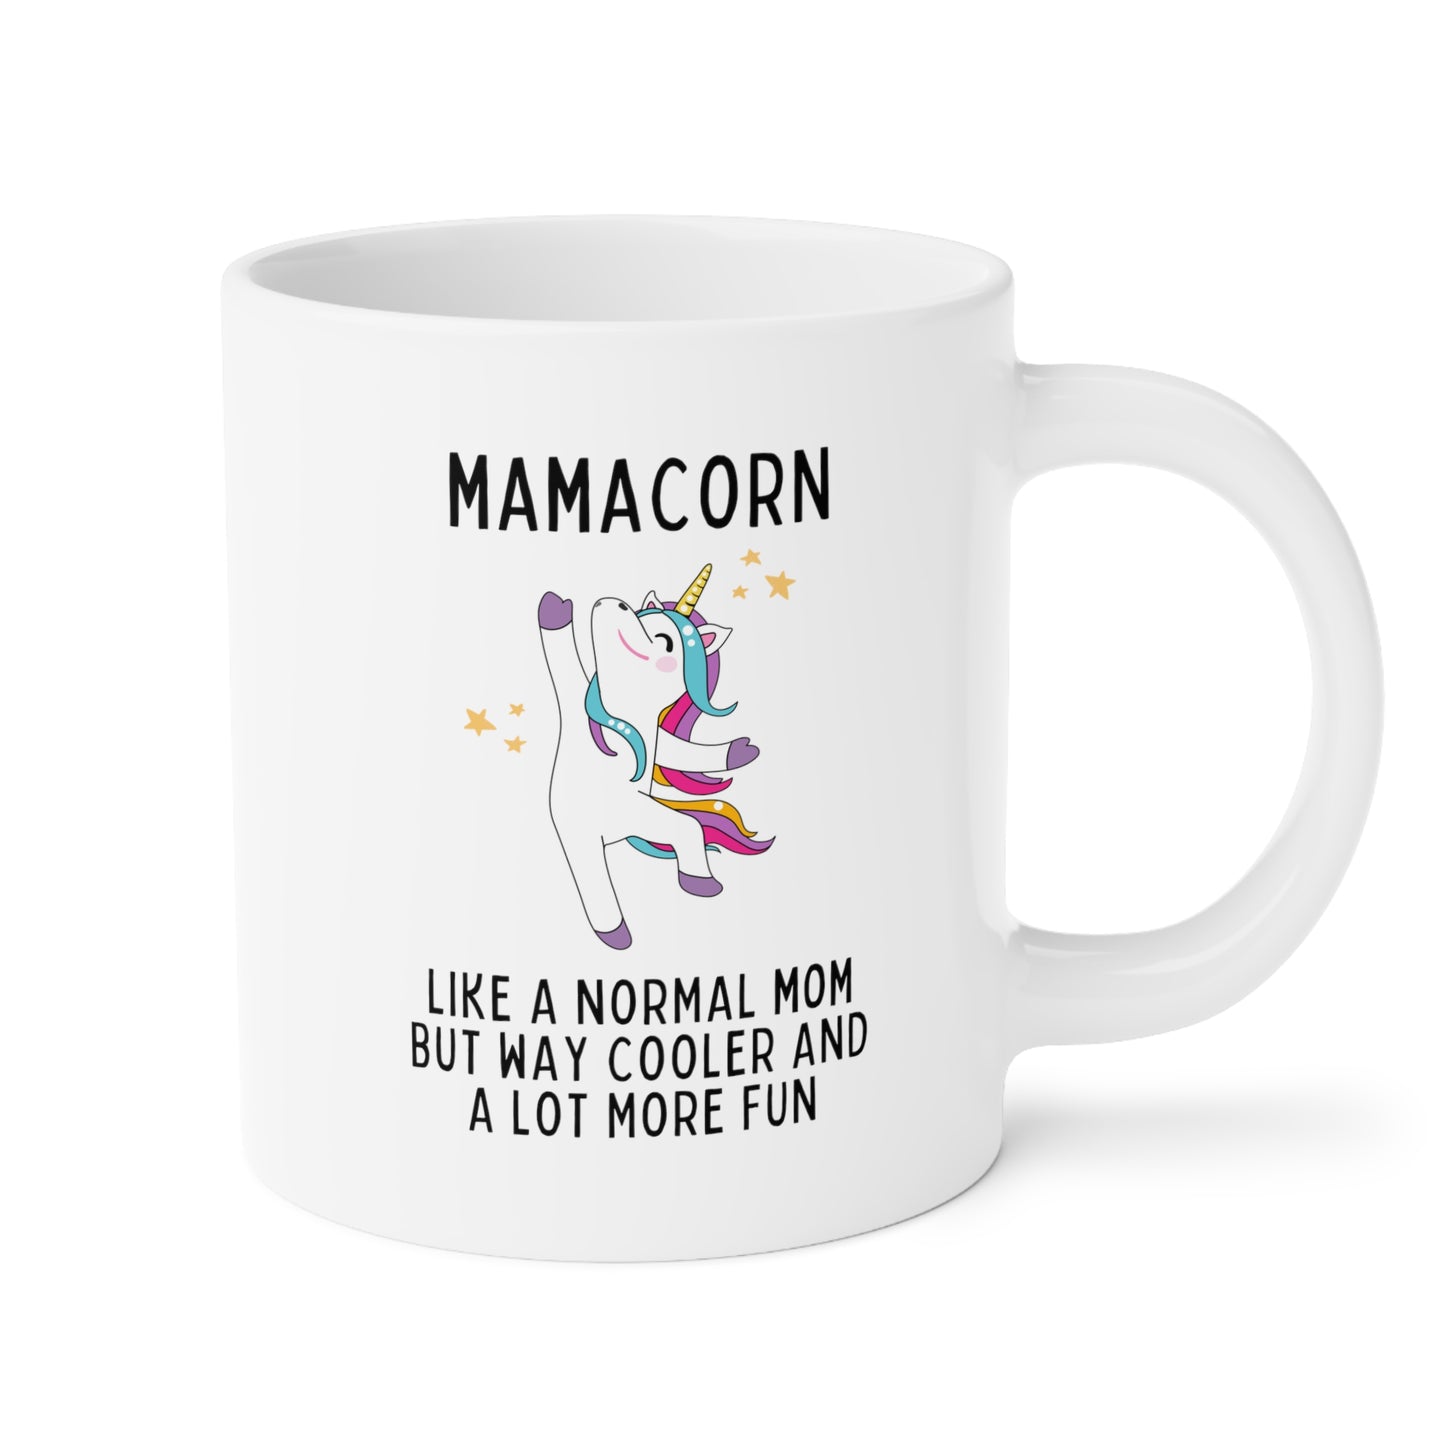 Mamacorn Like A Normal Mom But Way Cooler And A Lot More Fun 20oz white funny large coffee mug gift for mom unicorn lover awesome mothers day waveywares wavey wares wavywares wavy wares